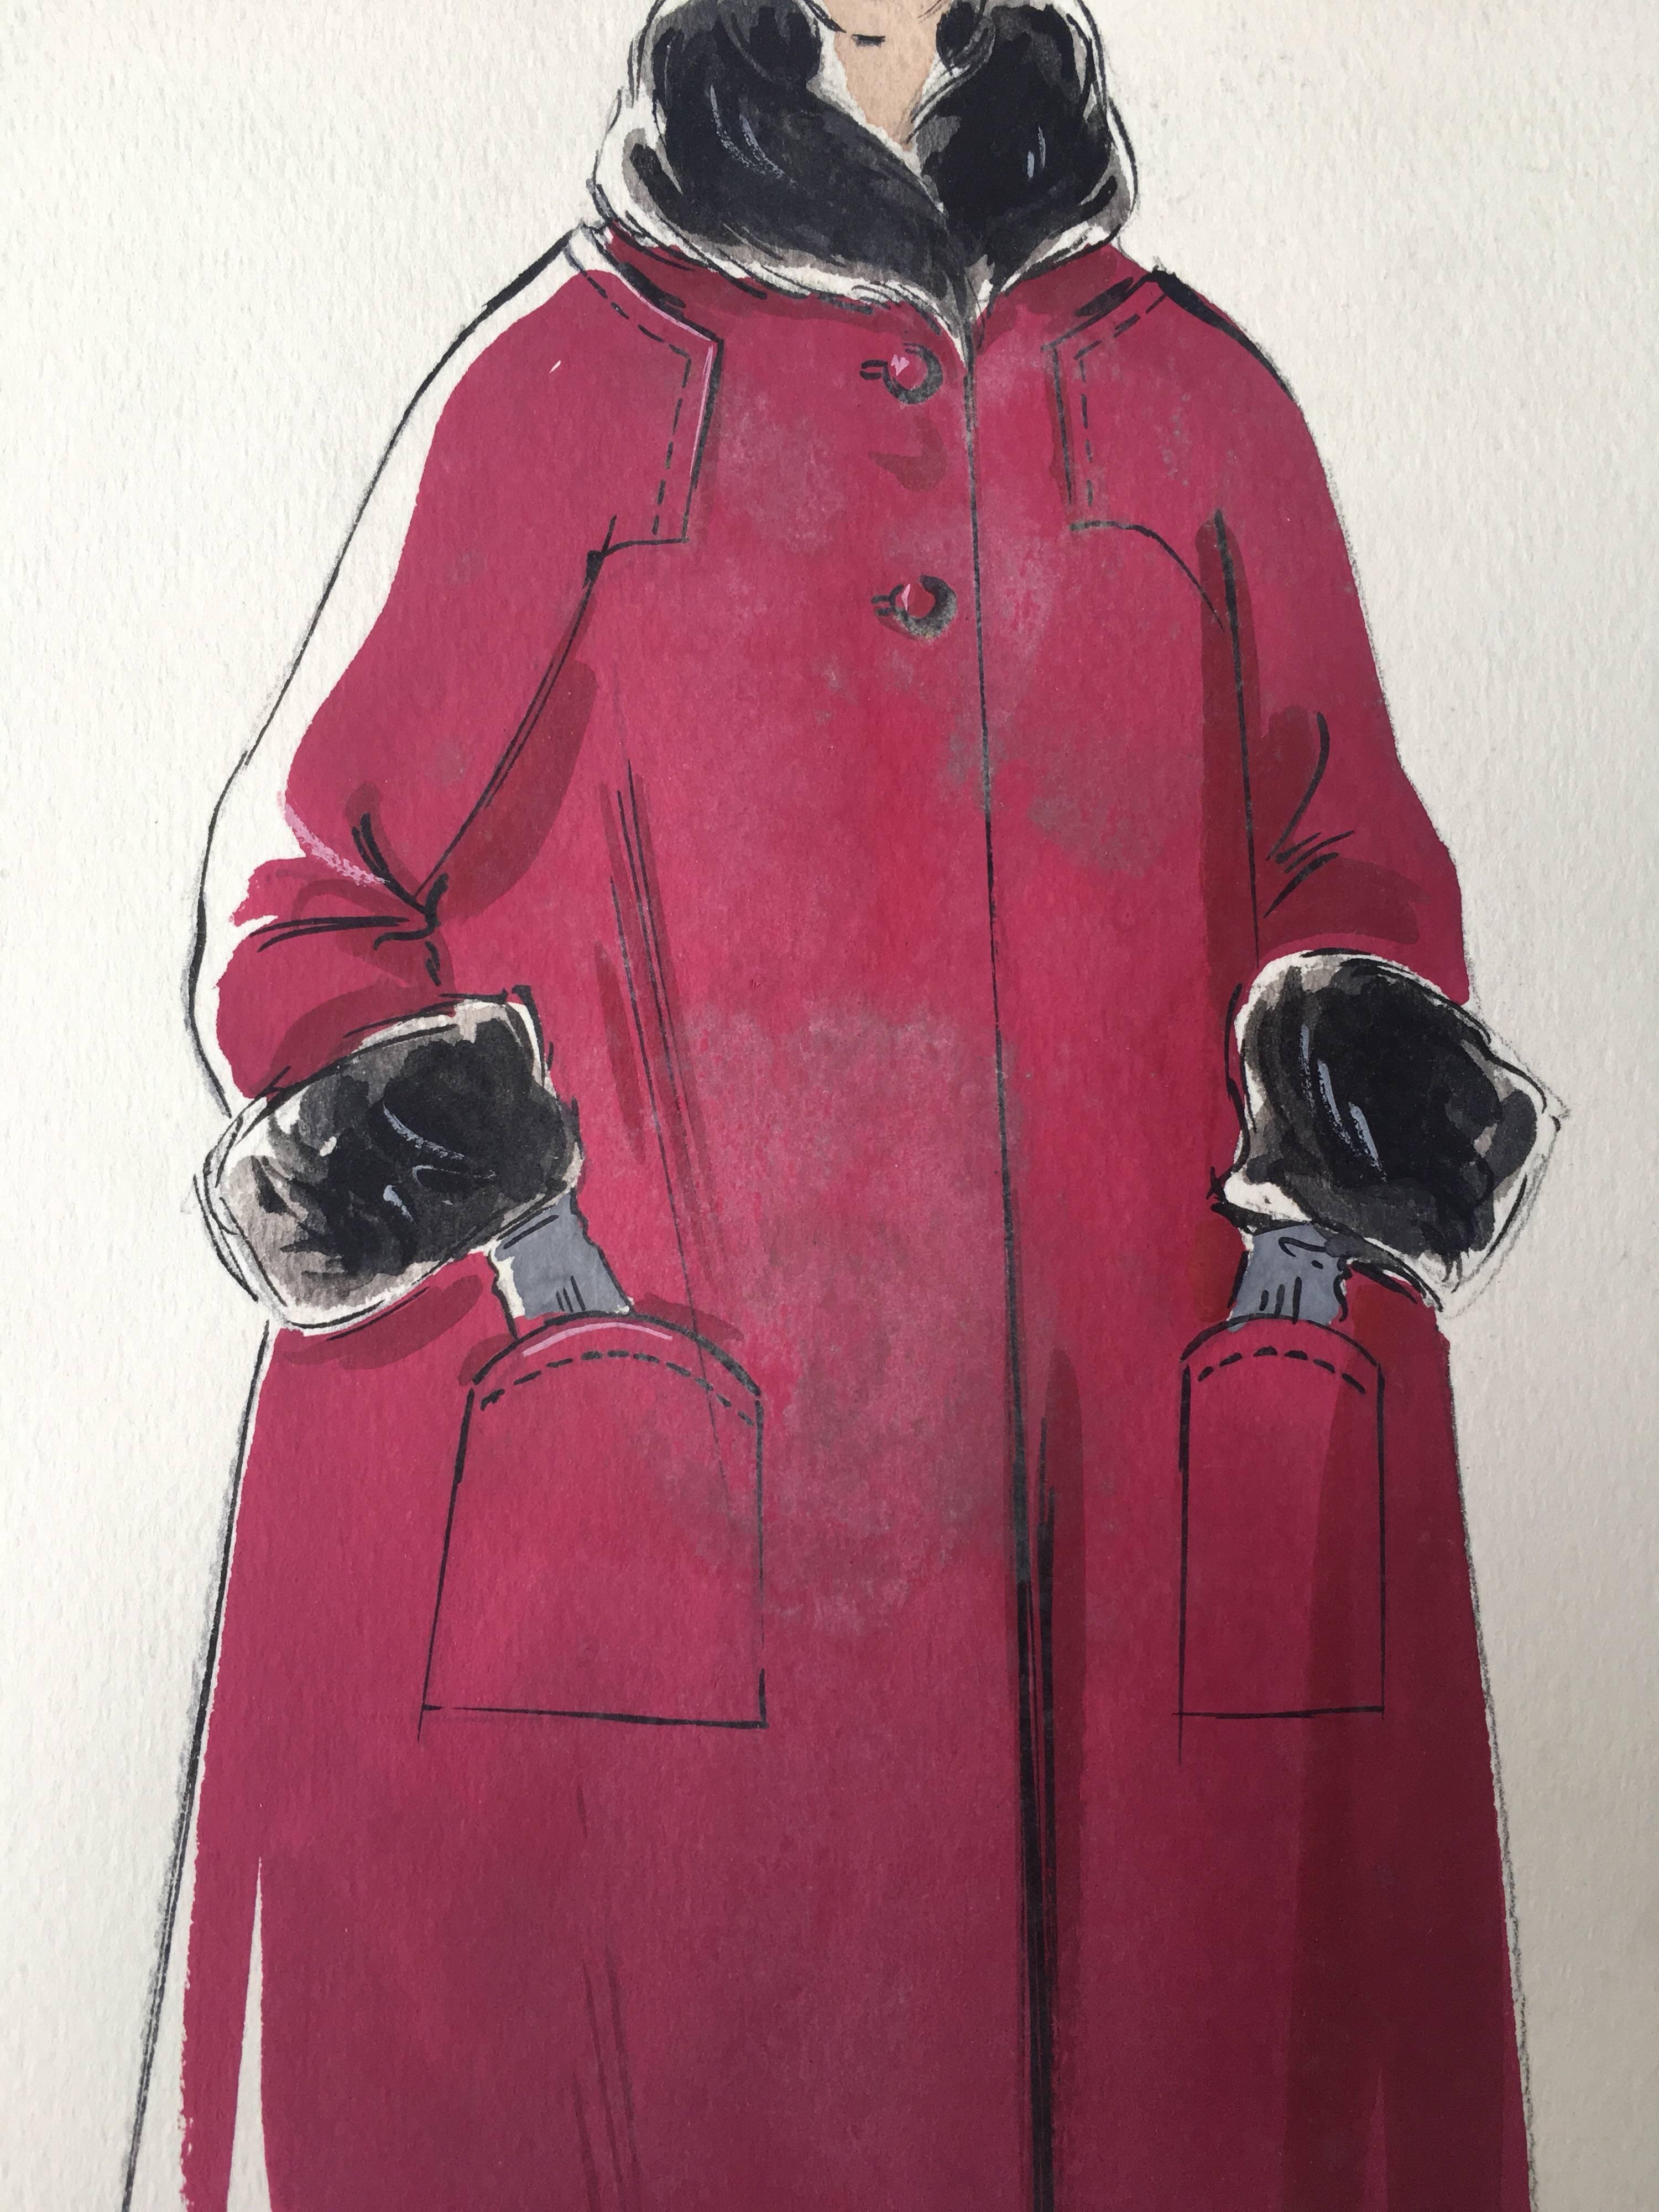 lady in red coat painting